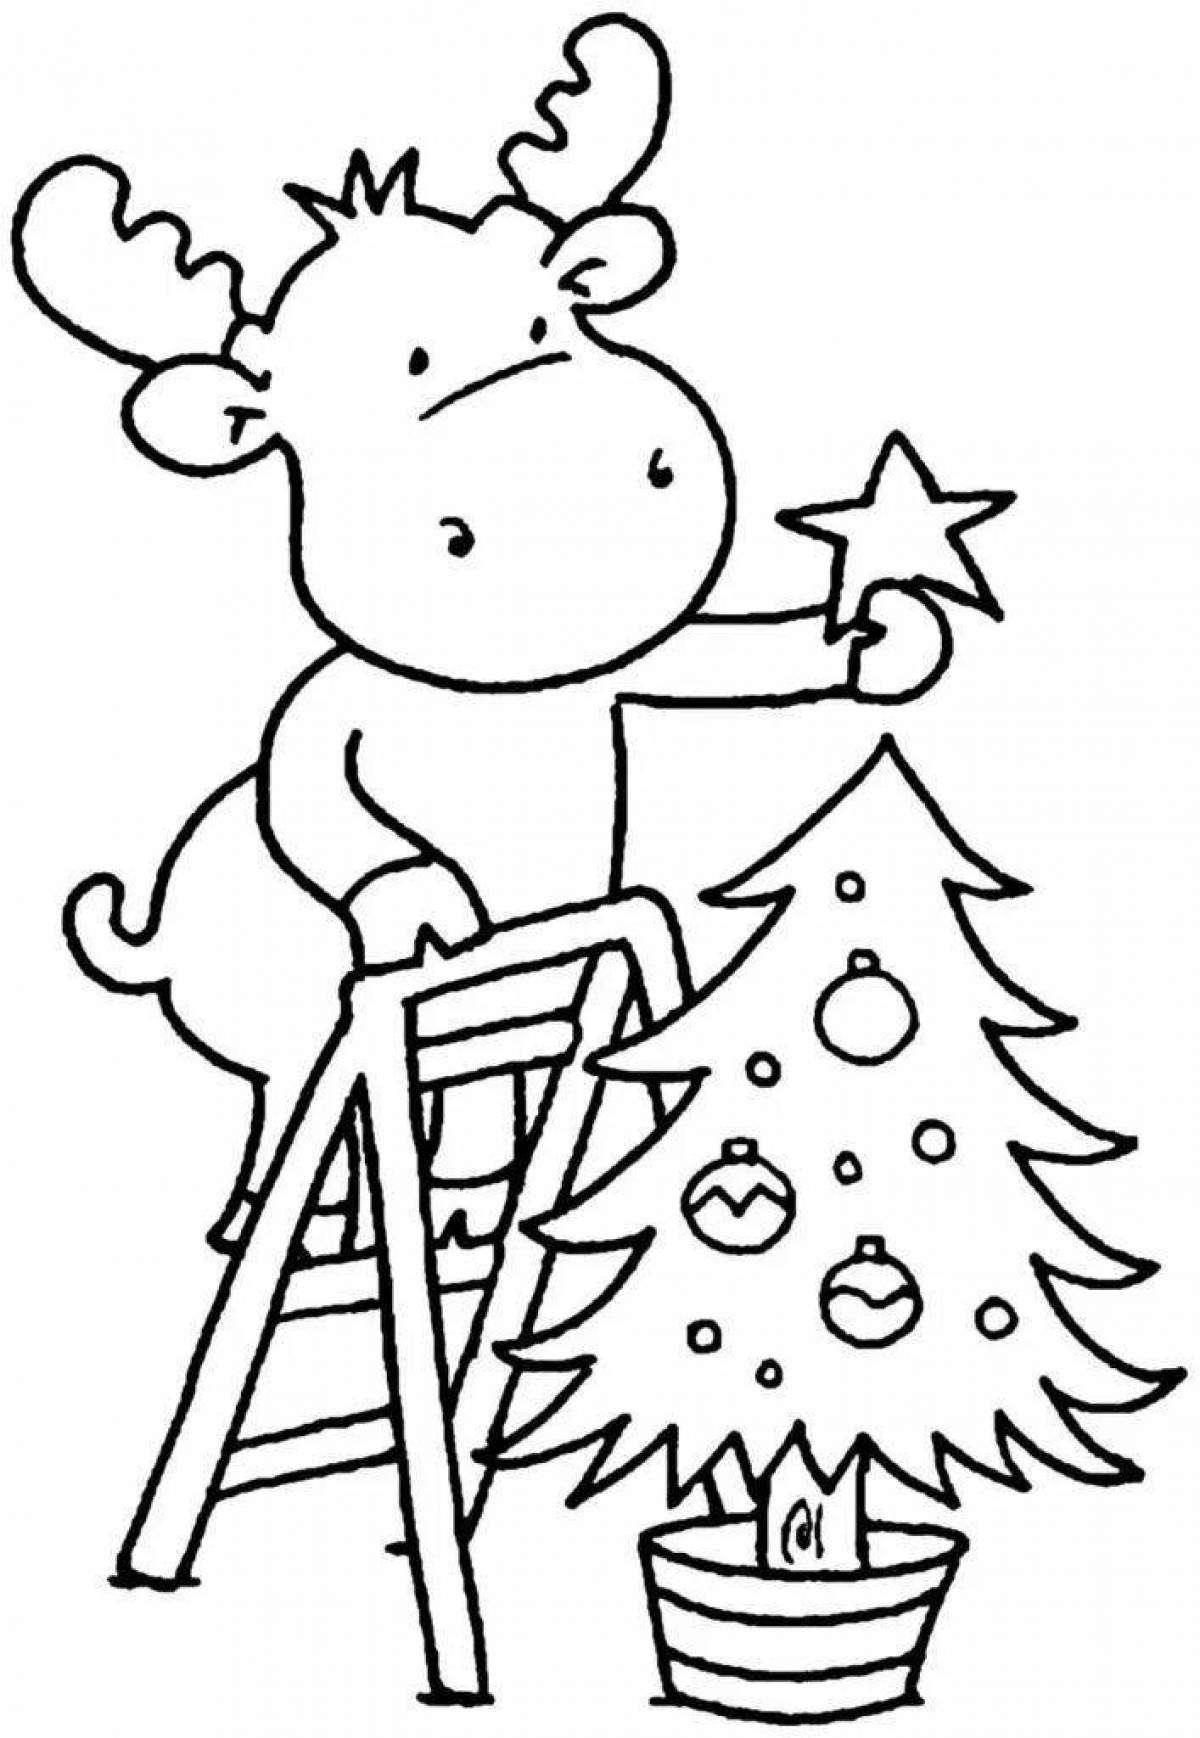 Adorable Christmas coloring pictures